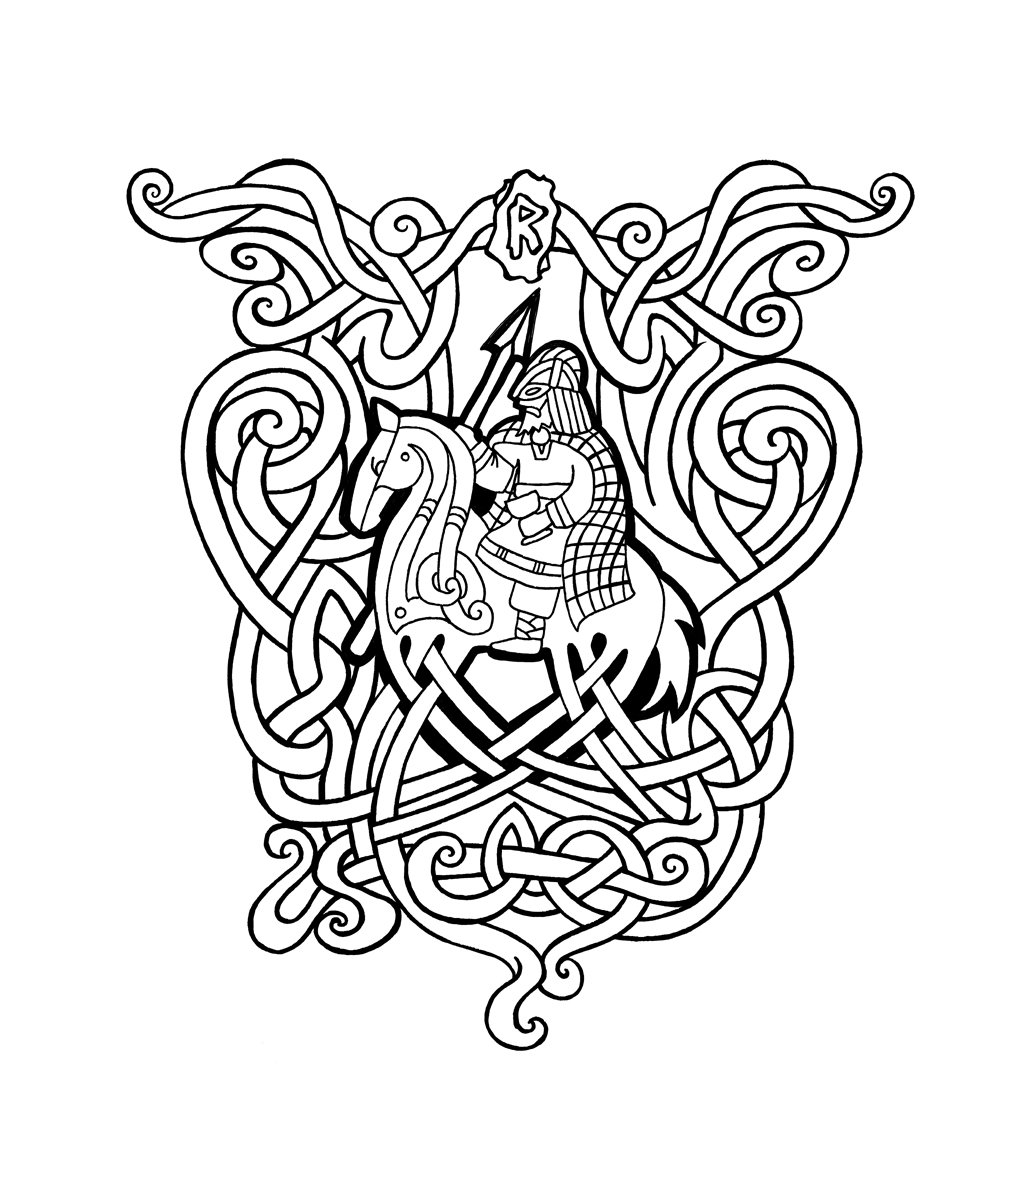 Odin and Sleipnir Tattoo Design with Valknut and Knotwork Motif - Basic Line Drawing - Fineliner Pen Drawing by Imogen Smid